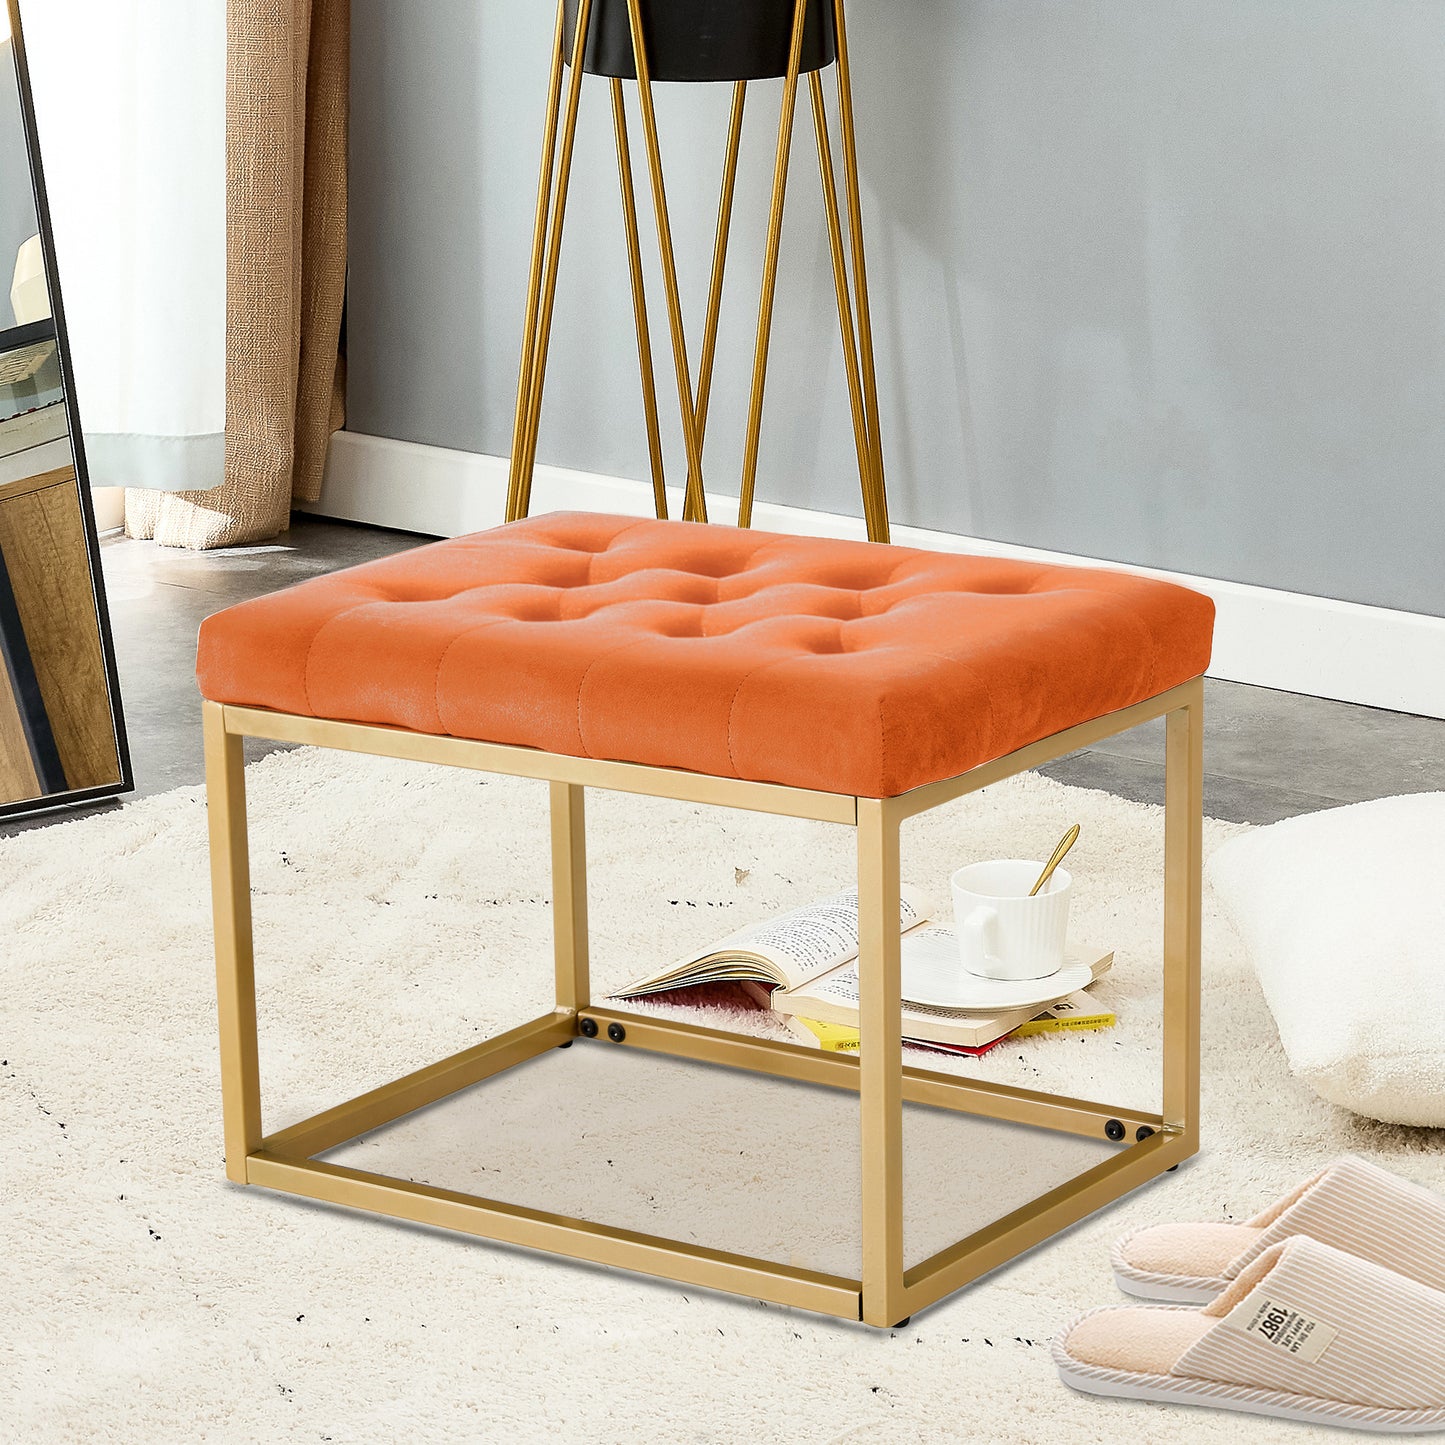 Velvet Shoe Changing Stool, Orange Footstool, Square Vanity Chair, Sofa stool,Makup Stool .Vanity Seat ,Rest stool. Piano Bench .Suitable for Clothes Shop,Living Room, Fitting Room BedroomST-001